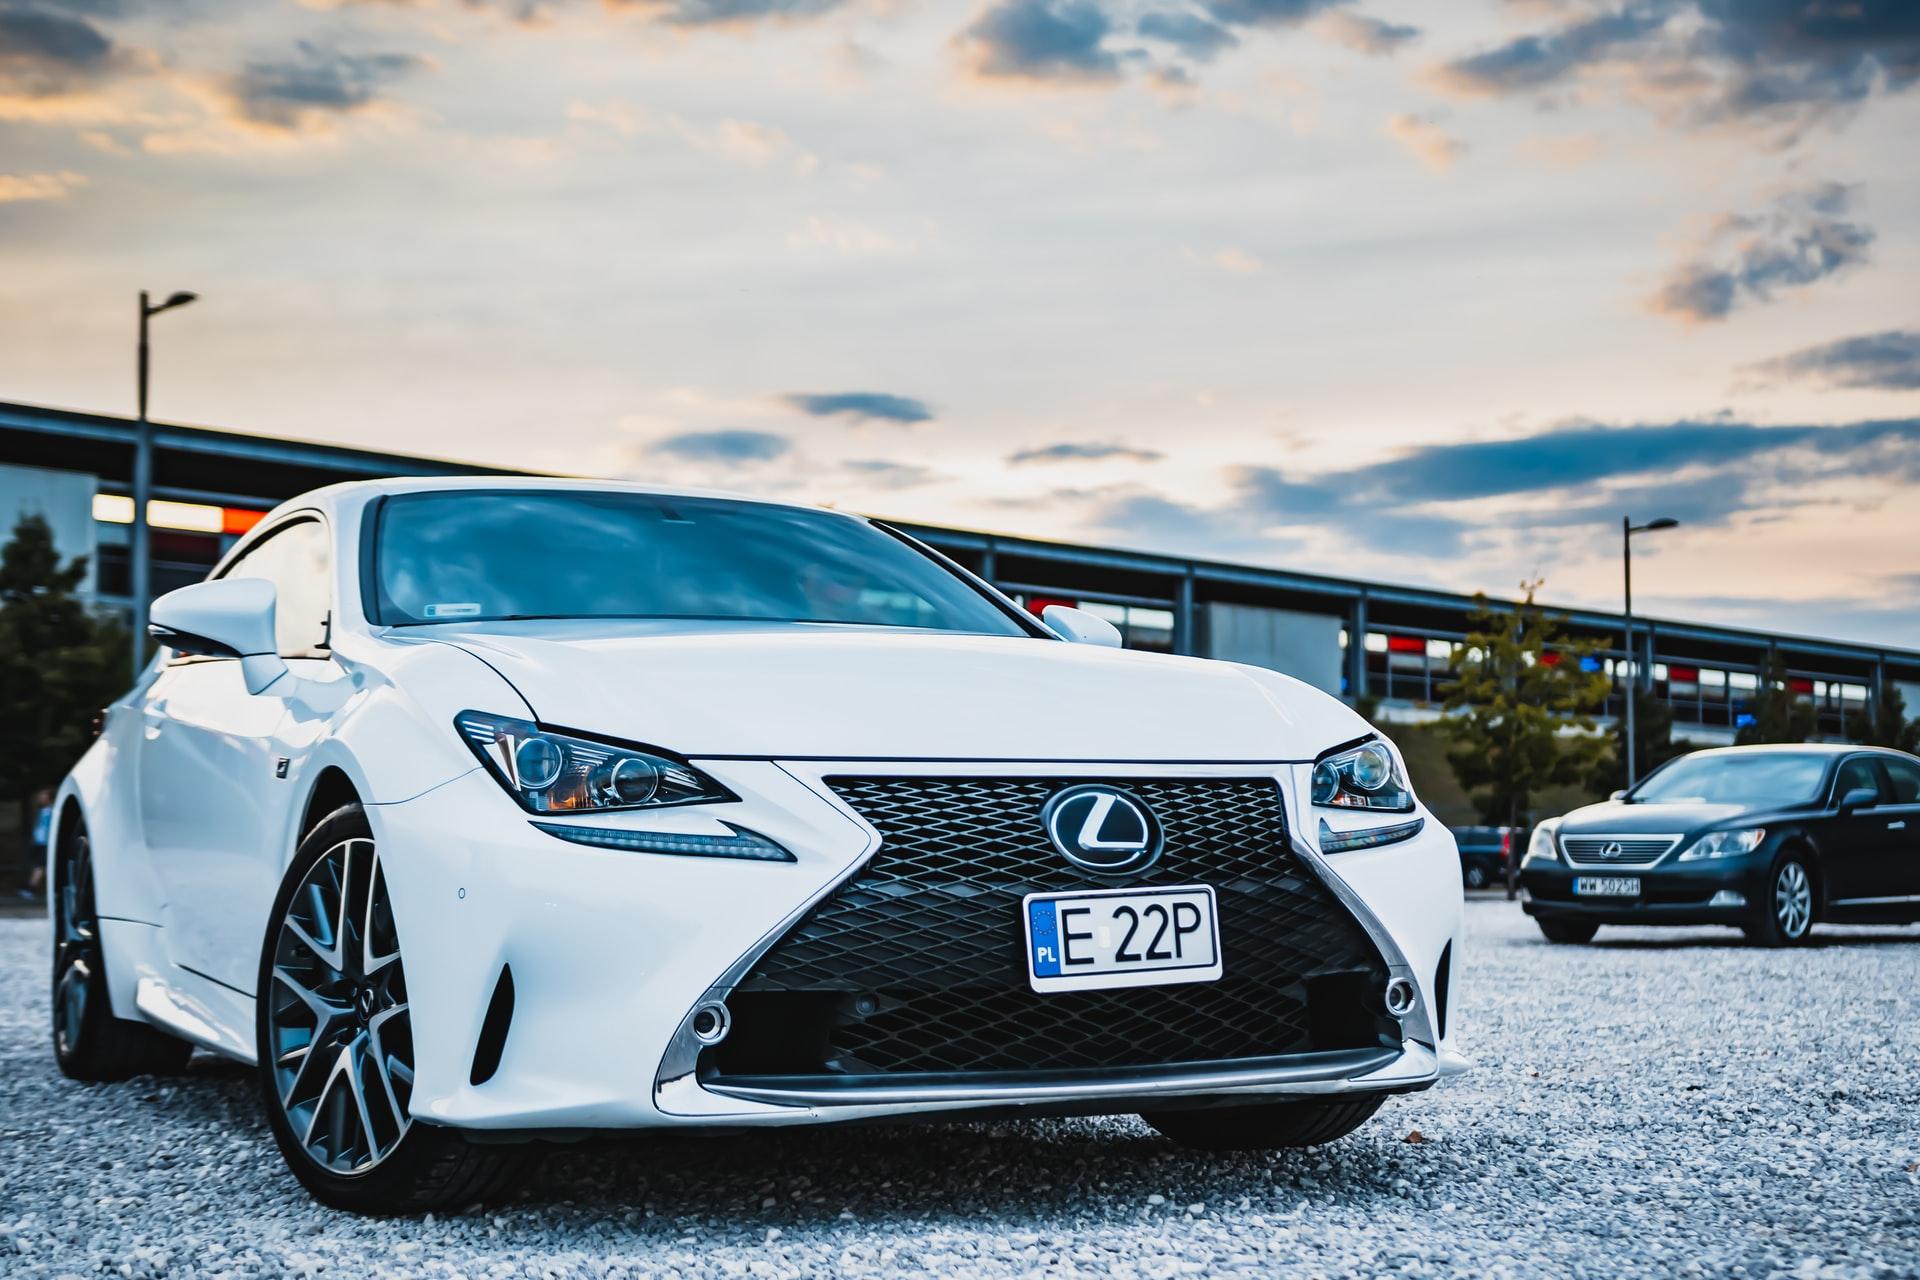 Lexus builds reliable sedans and SUVs which make them great used cars.